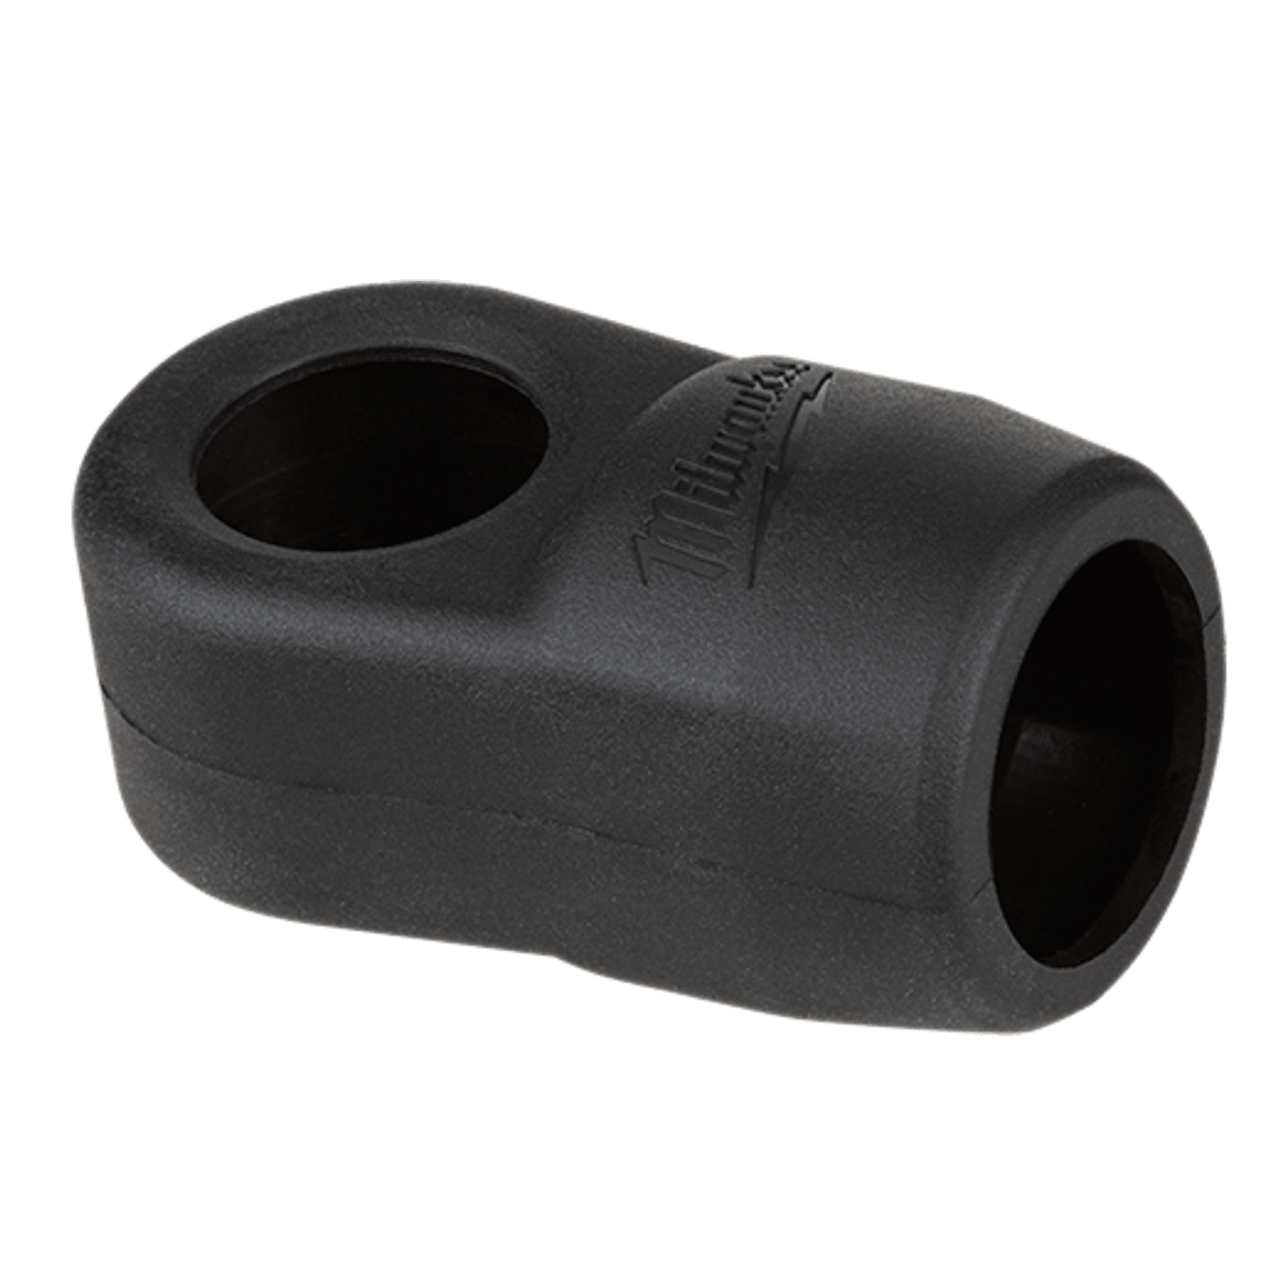 M12 FUEL? 1/4" Extended Reach Ratchet Rubber Boot